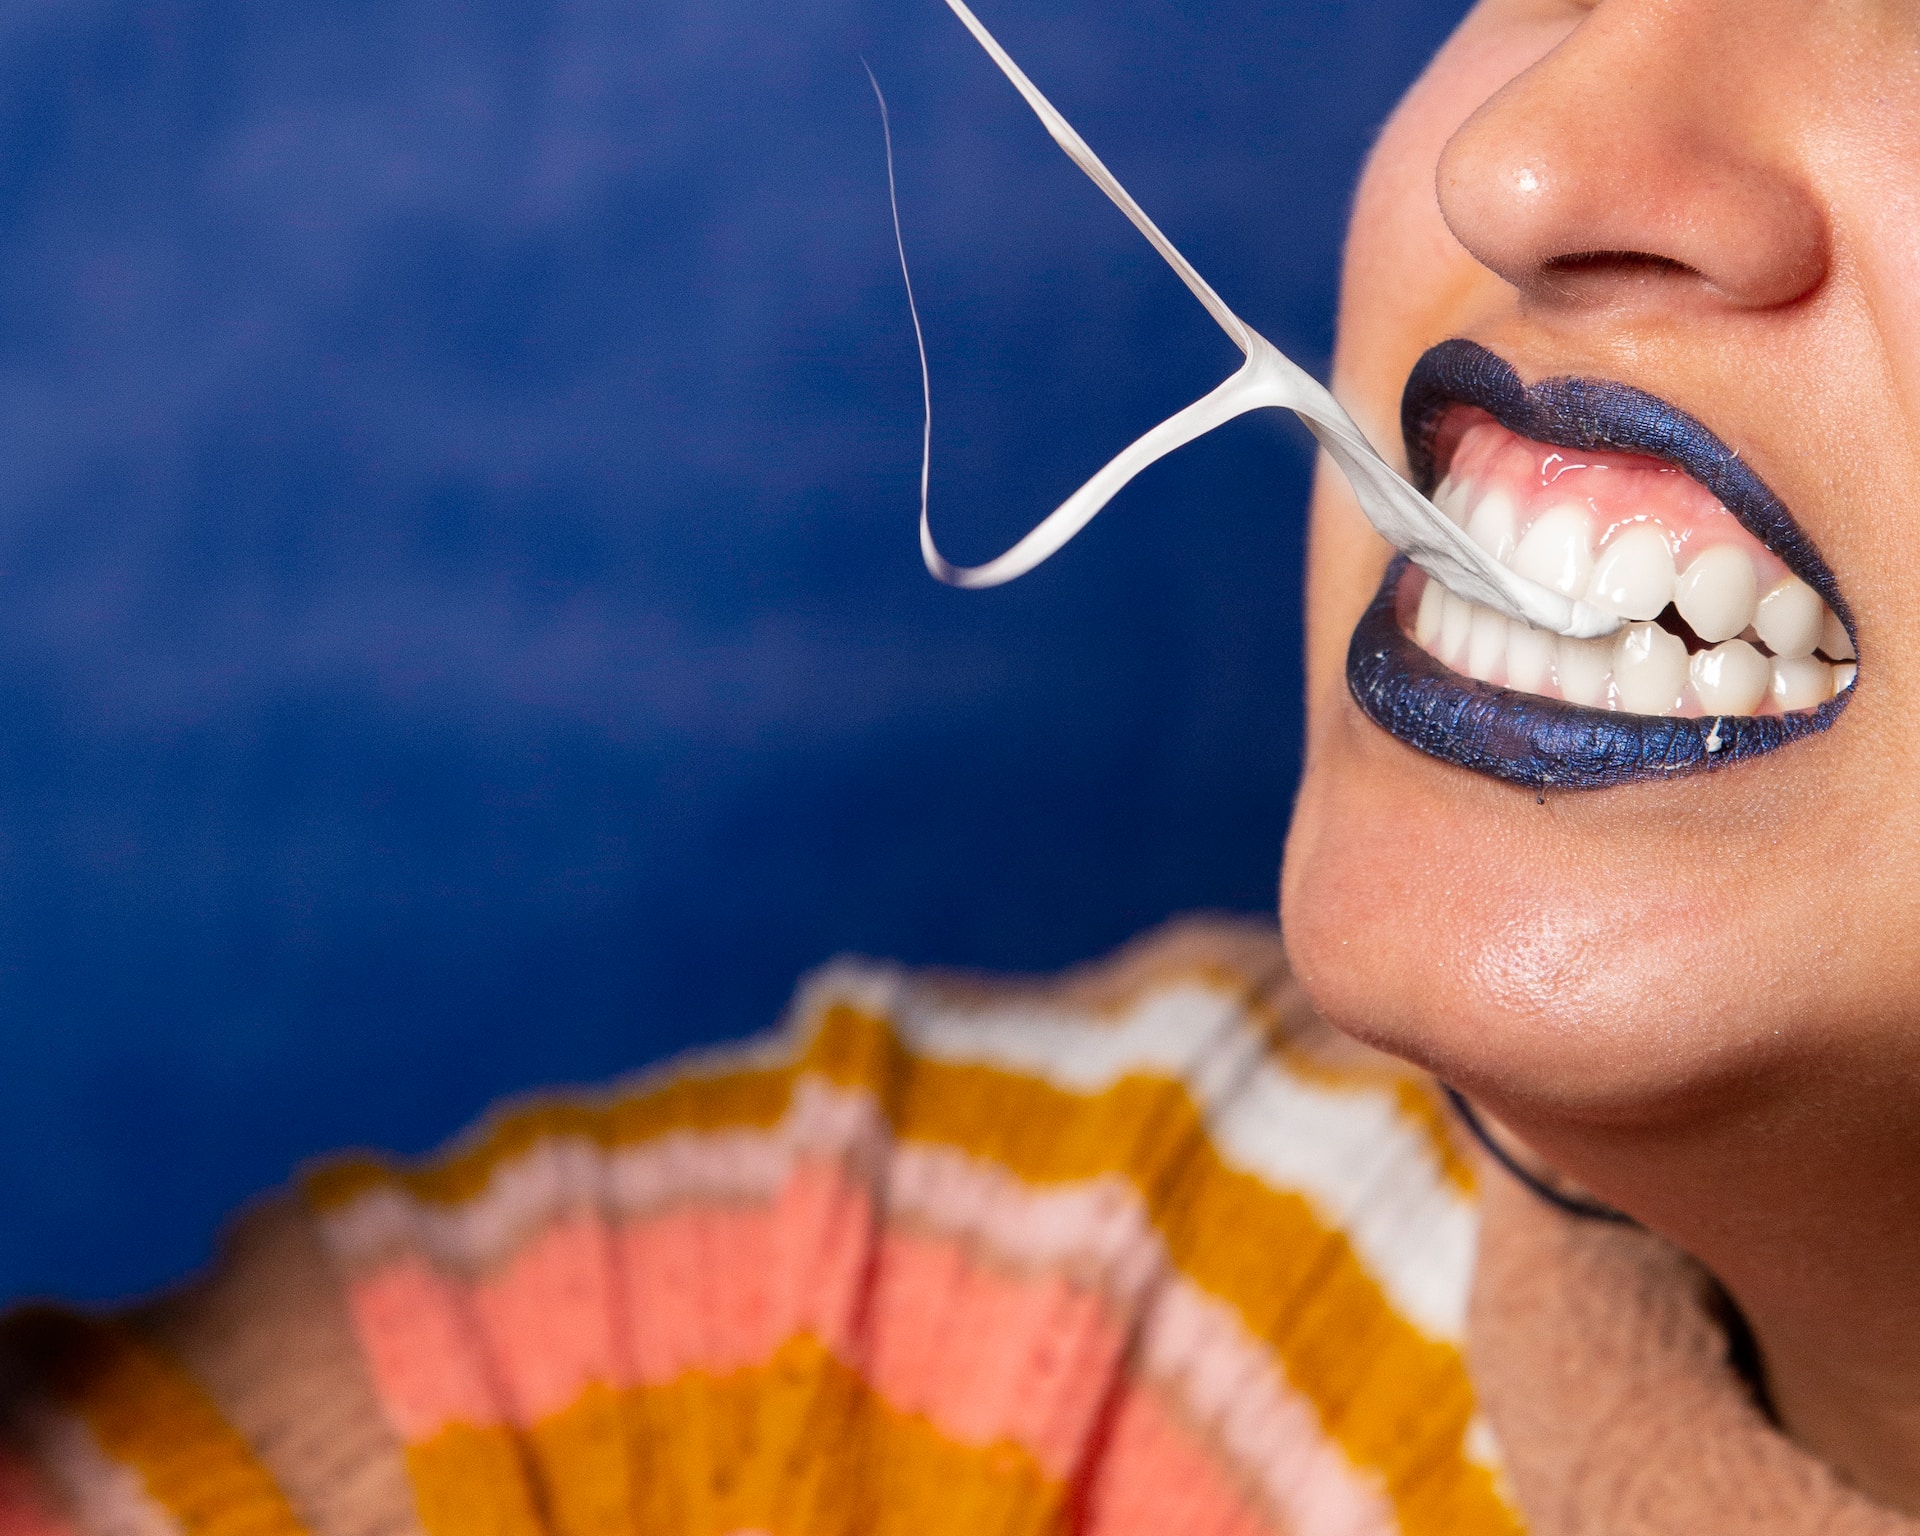 person with blue lips and white teeth pulling chewing gum from their mouth in strings - chewing gum dental health